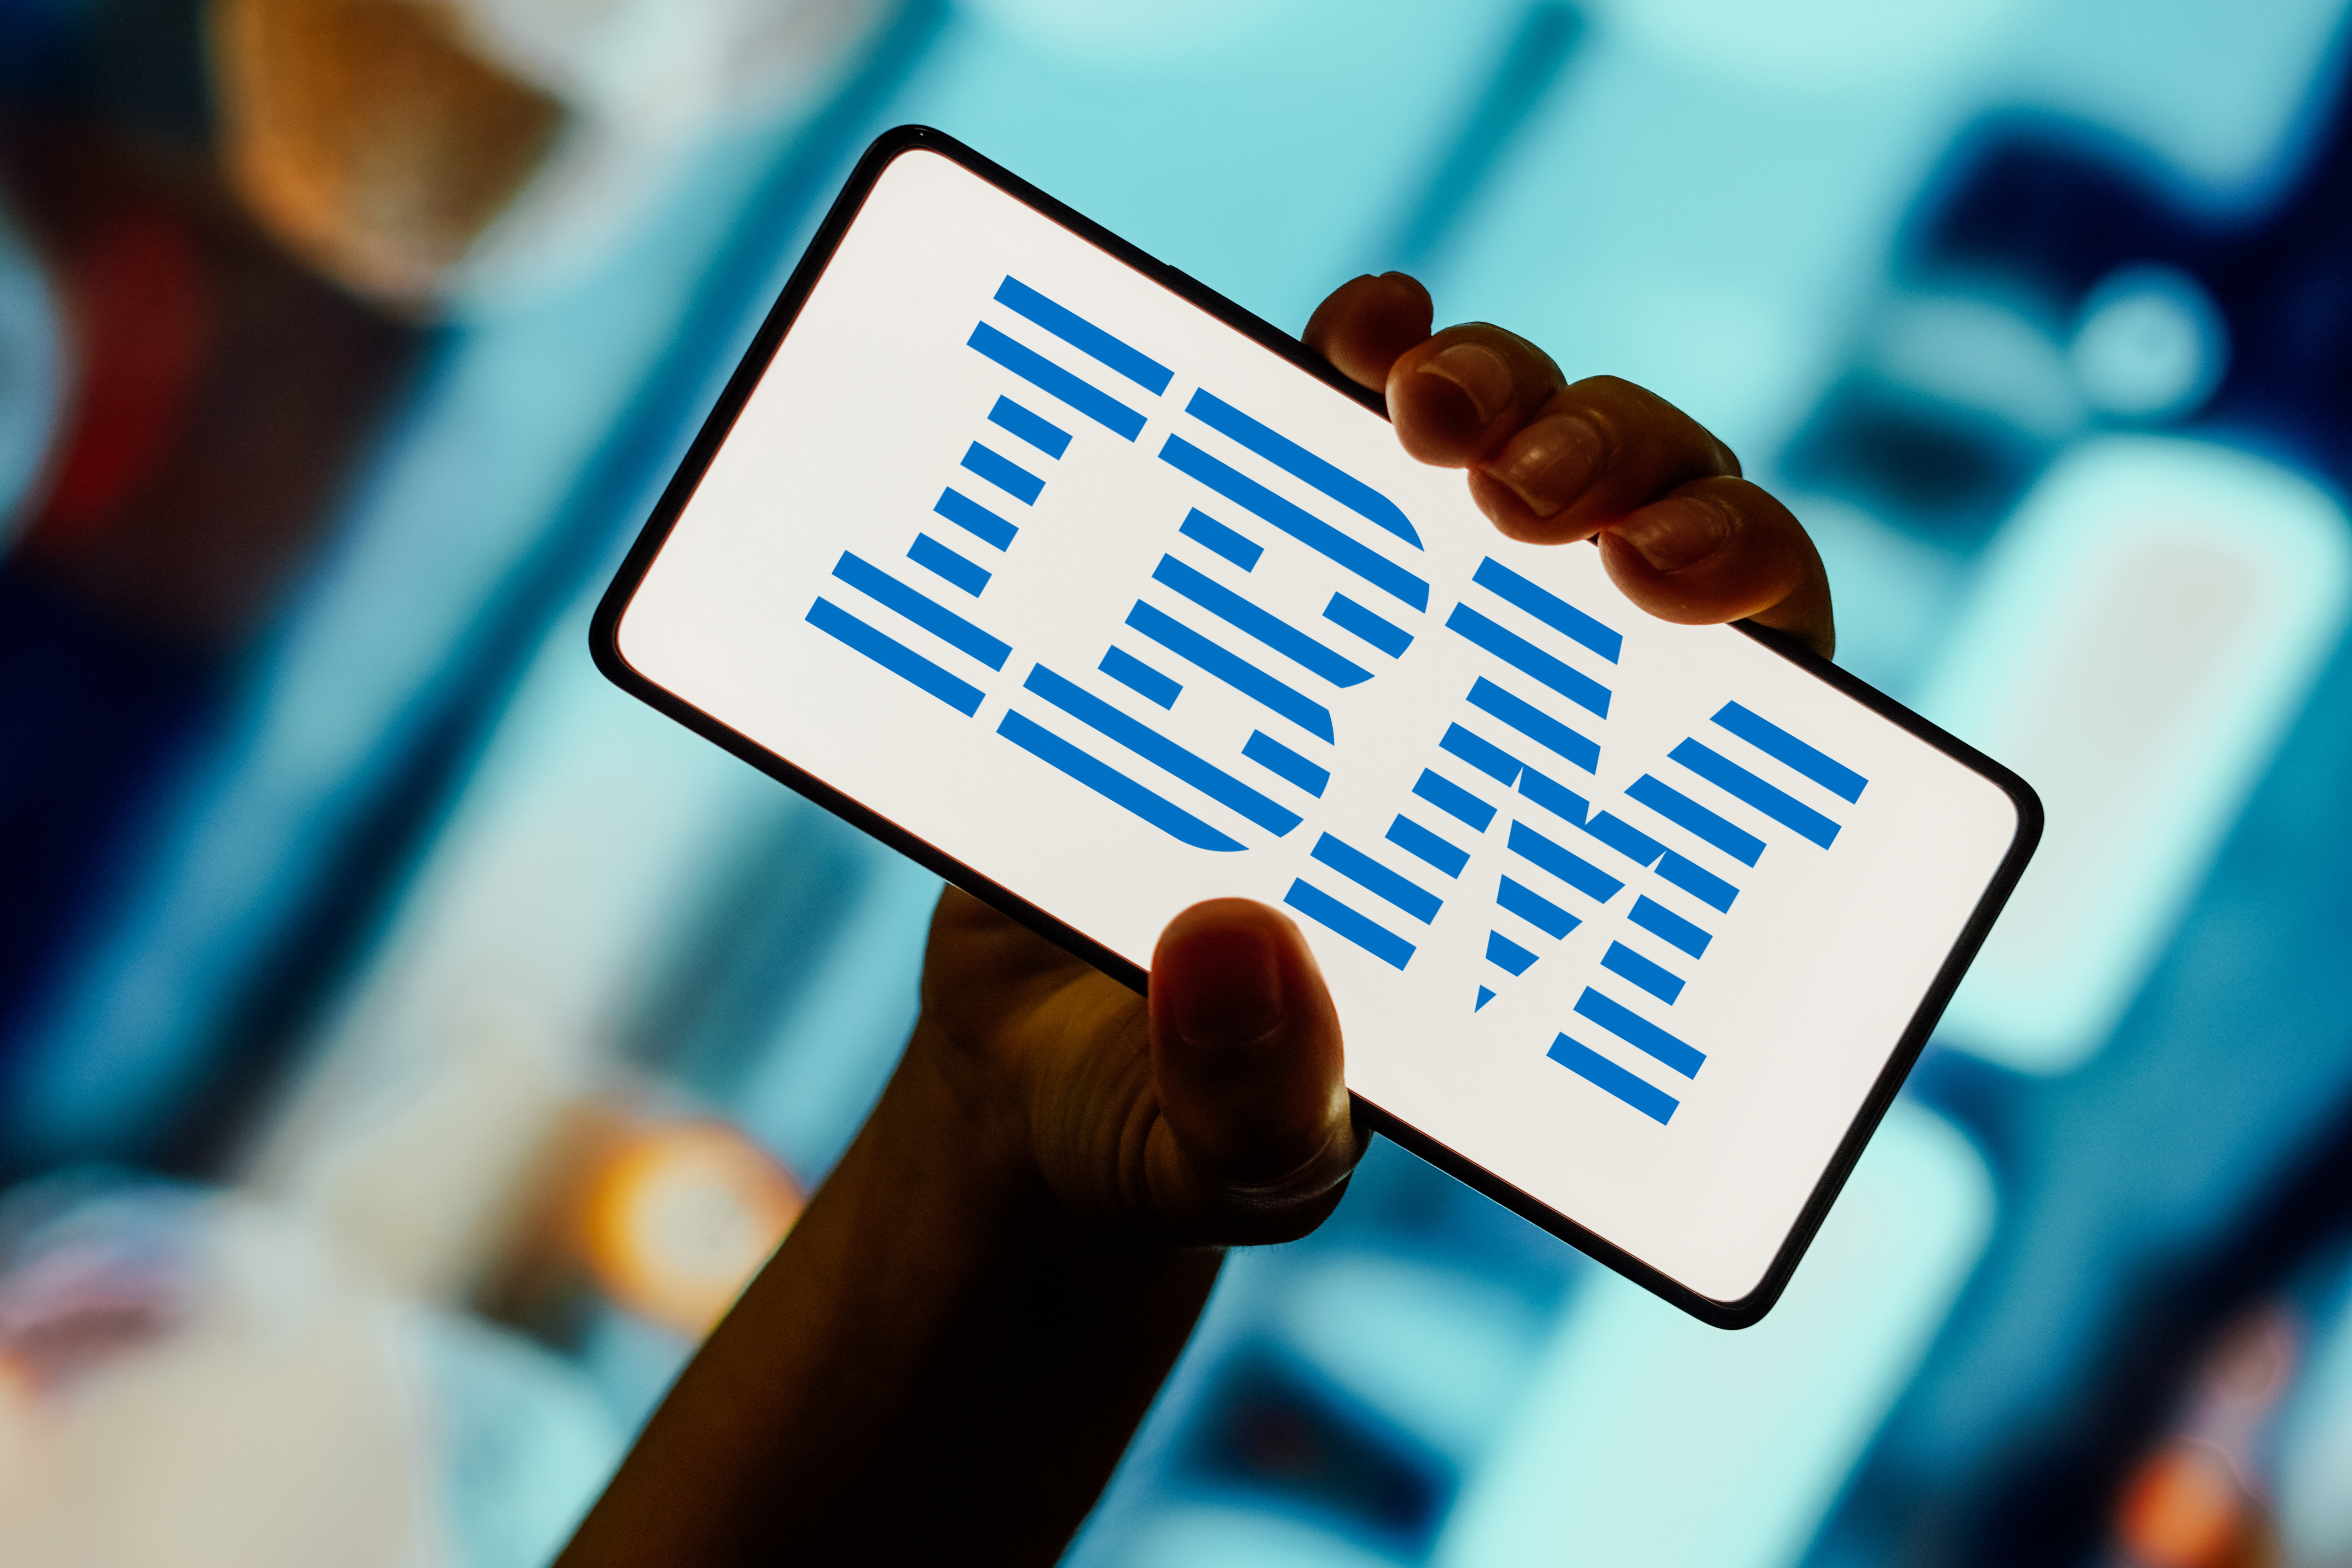 IBM logo displayed on a smartphone screen with blurry image in background